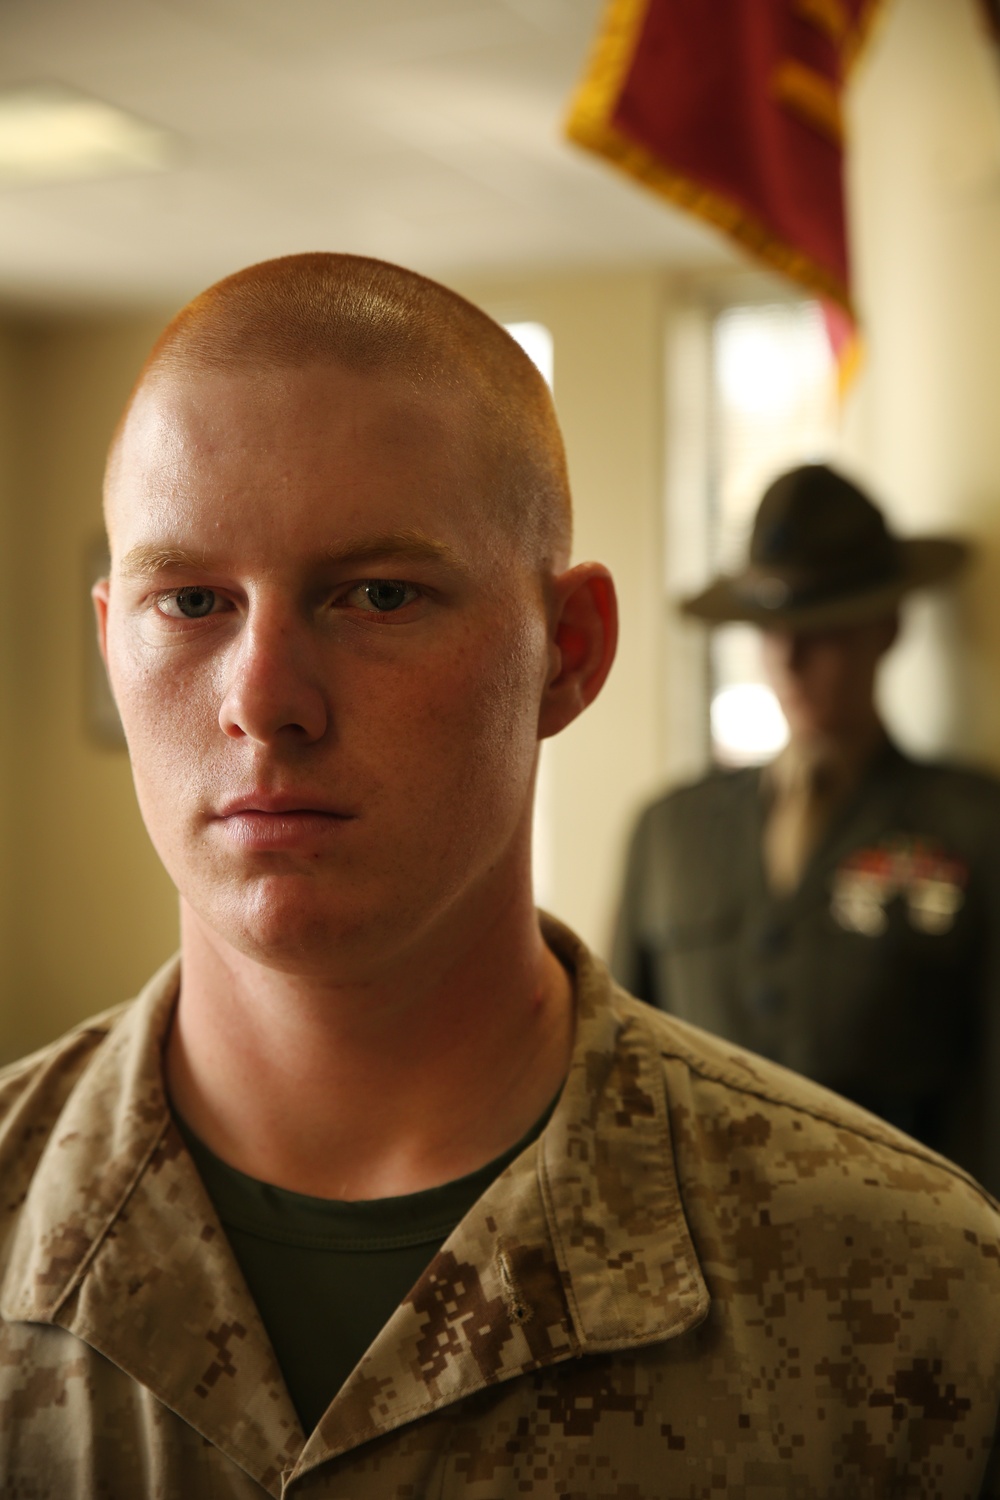 Northville, Mich., native training at Parris Island to become U.S. Marine